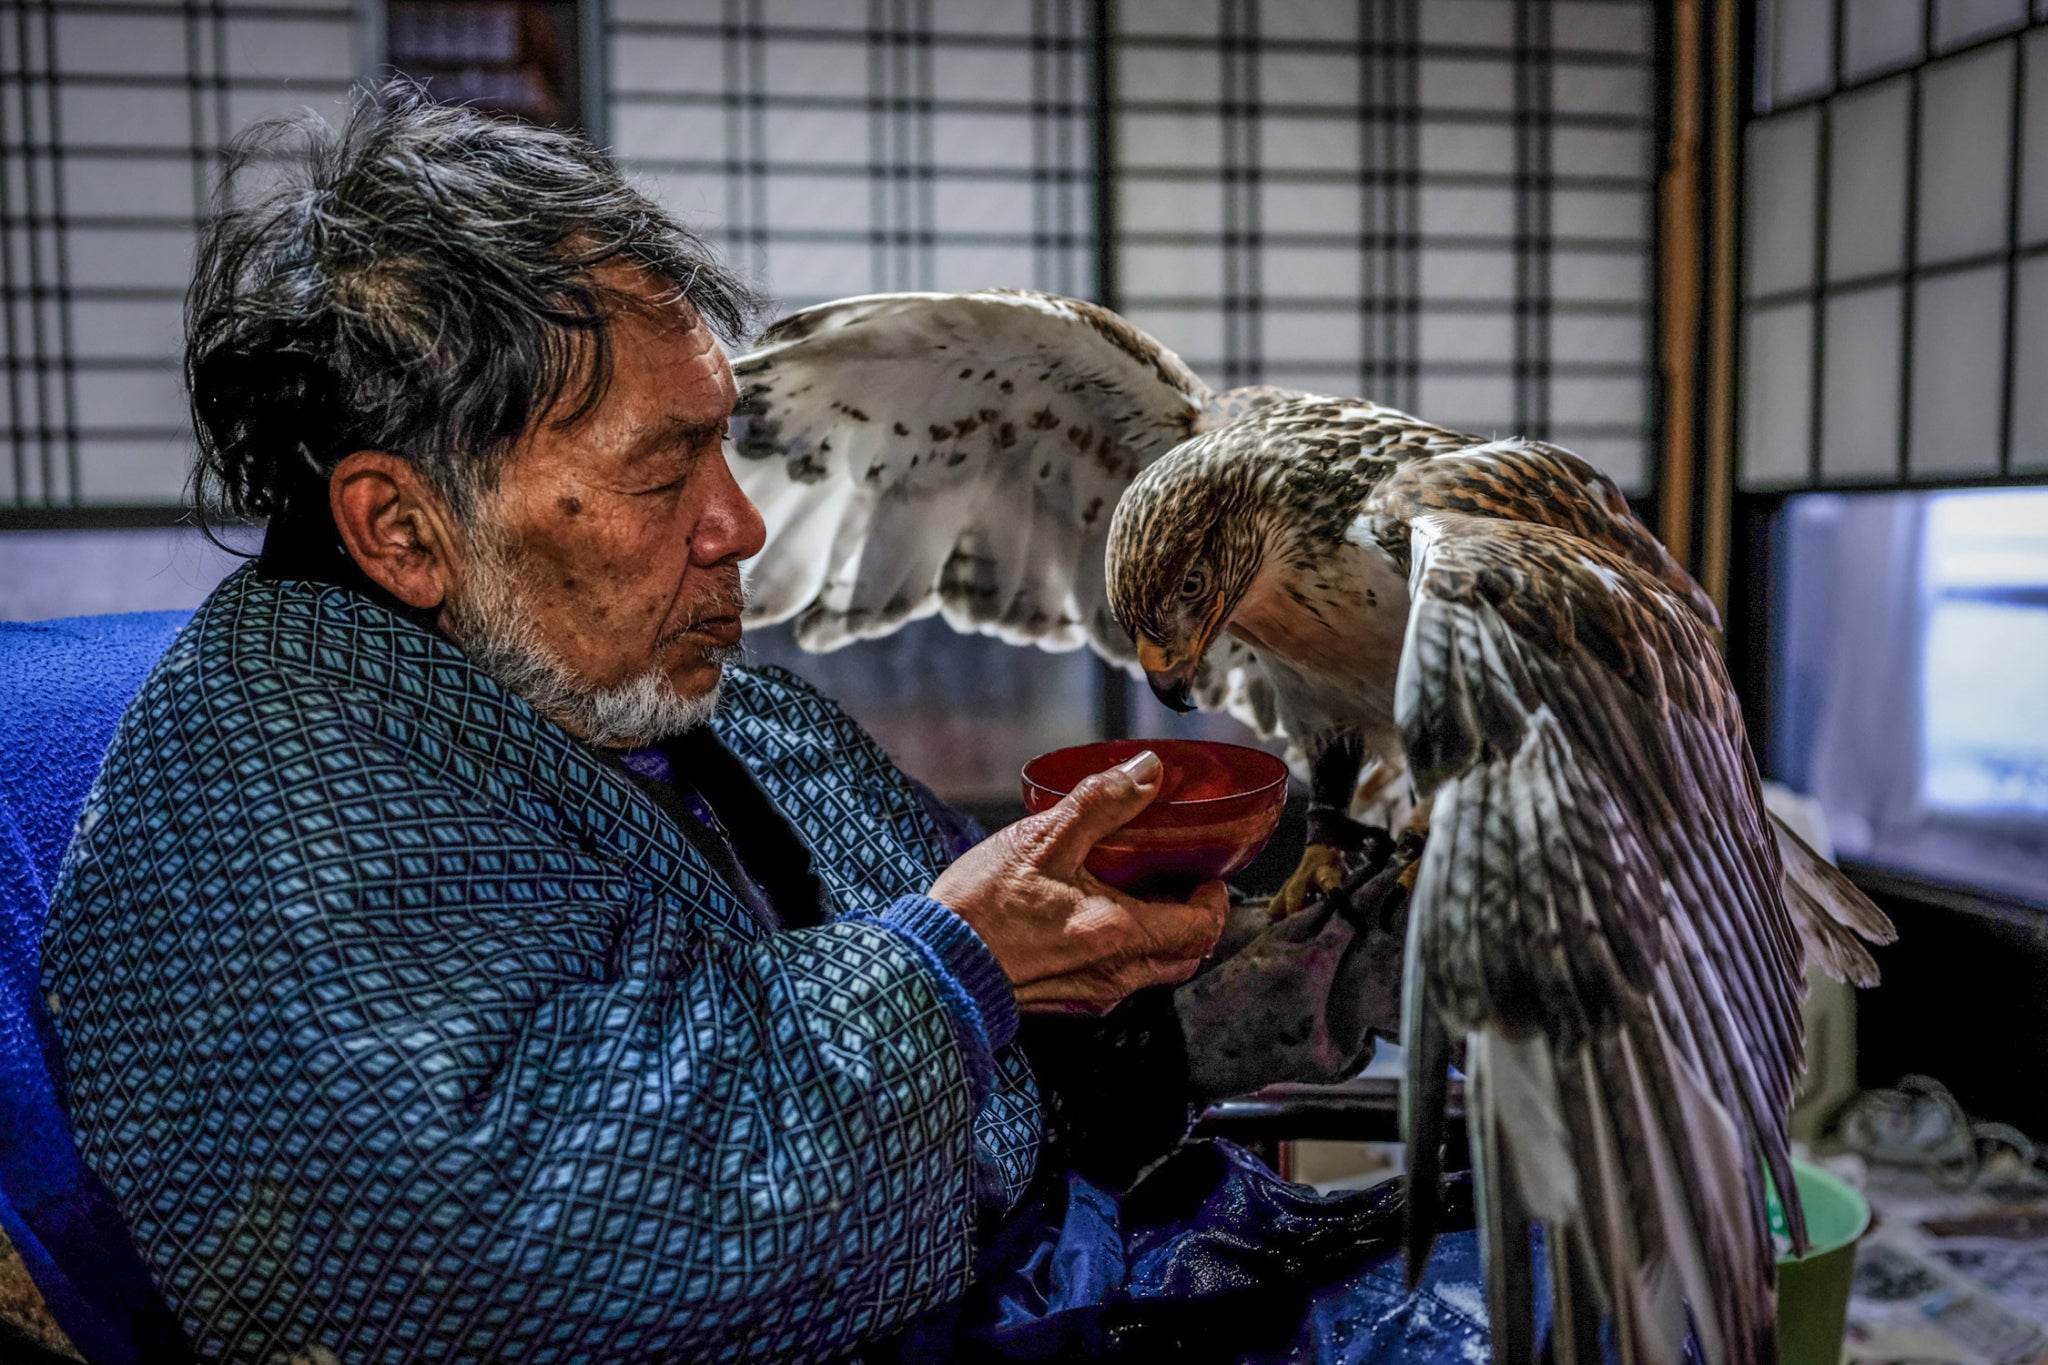 A ferruginous hawk takes a drink of warm water—a mirror image to the film scene that deeply inspired Matsubara.